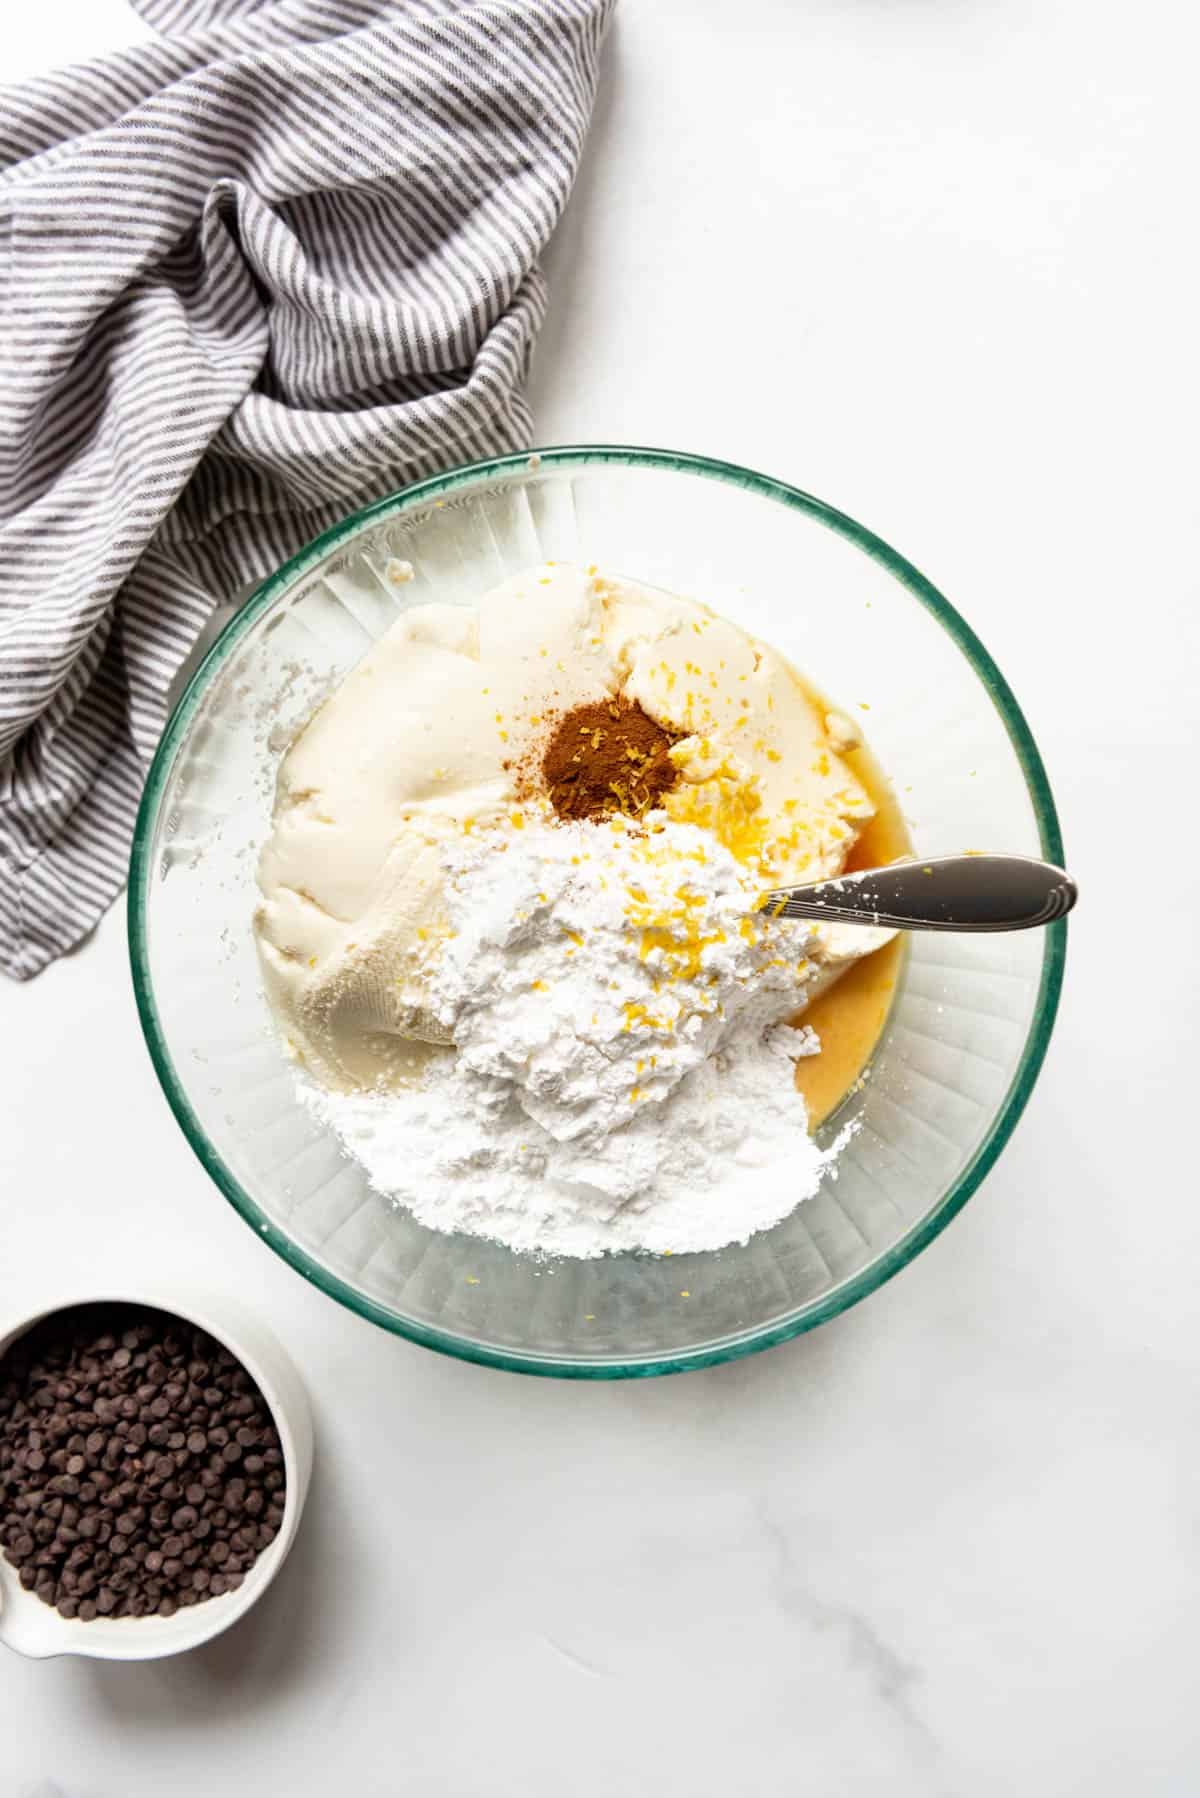 Combining ricotta cheese in a bowl with powdered sugar, cinnamon, lemon zest, and vanilla extract to make cannoli filling.